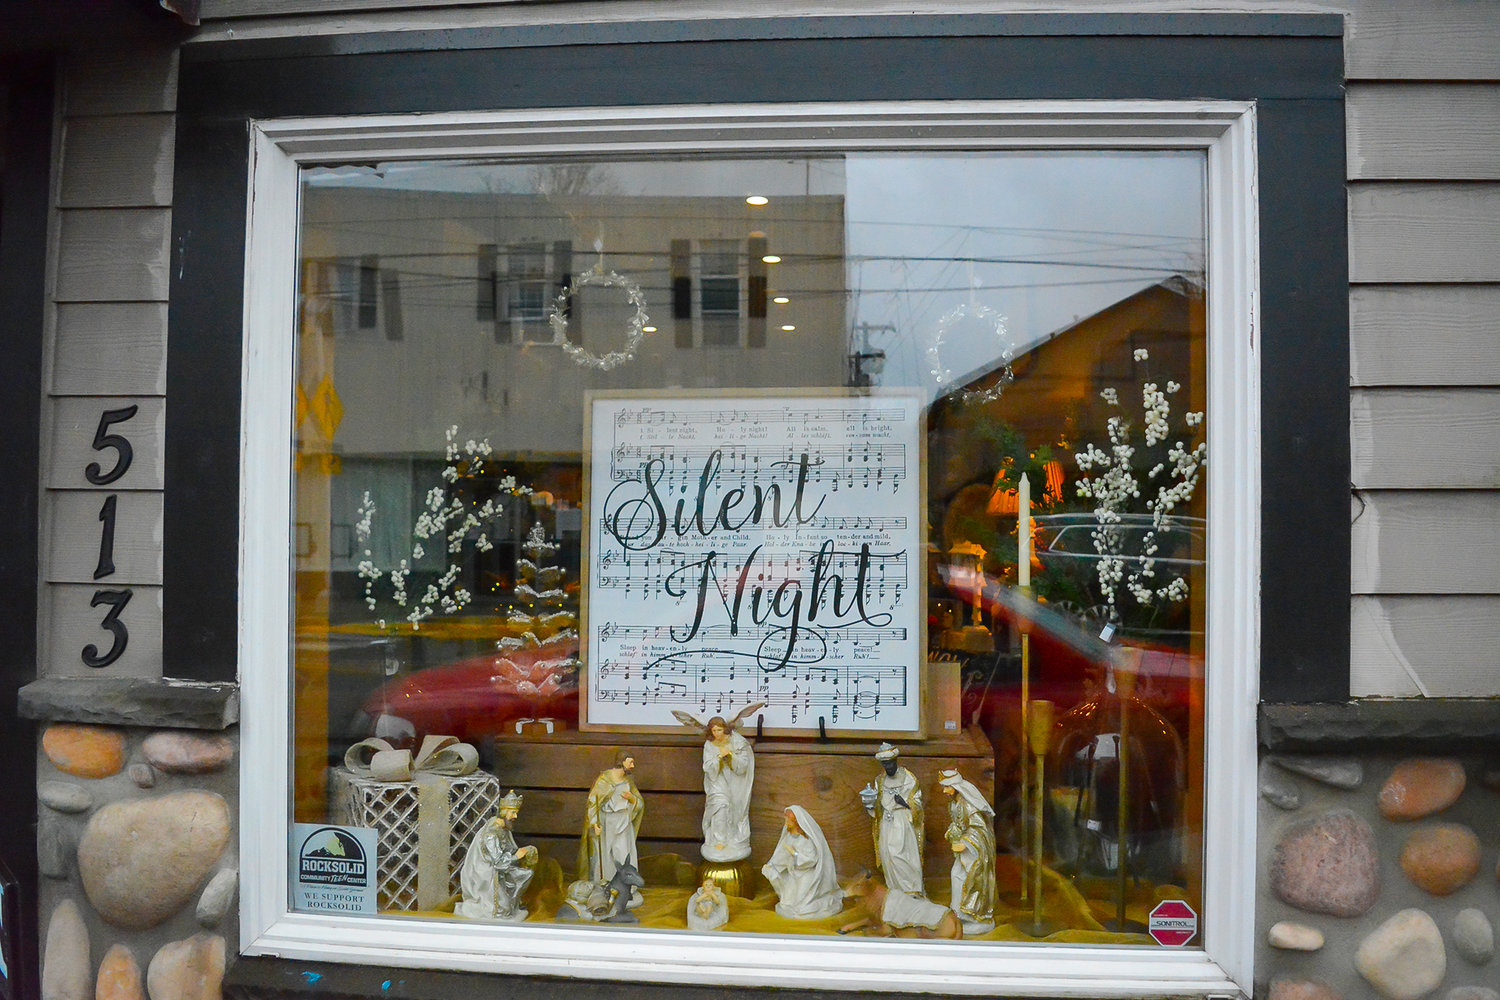 Part of Finishing Touch LLC’s window display.